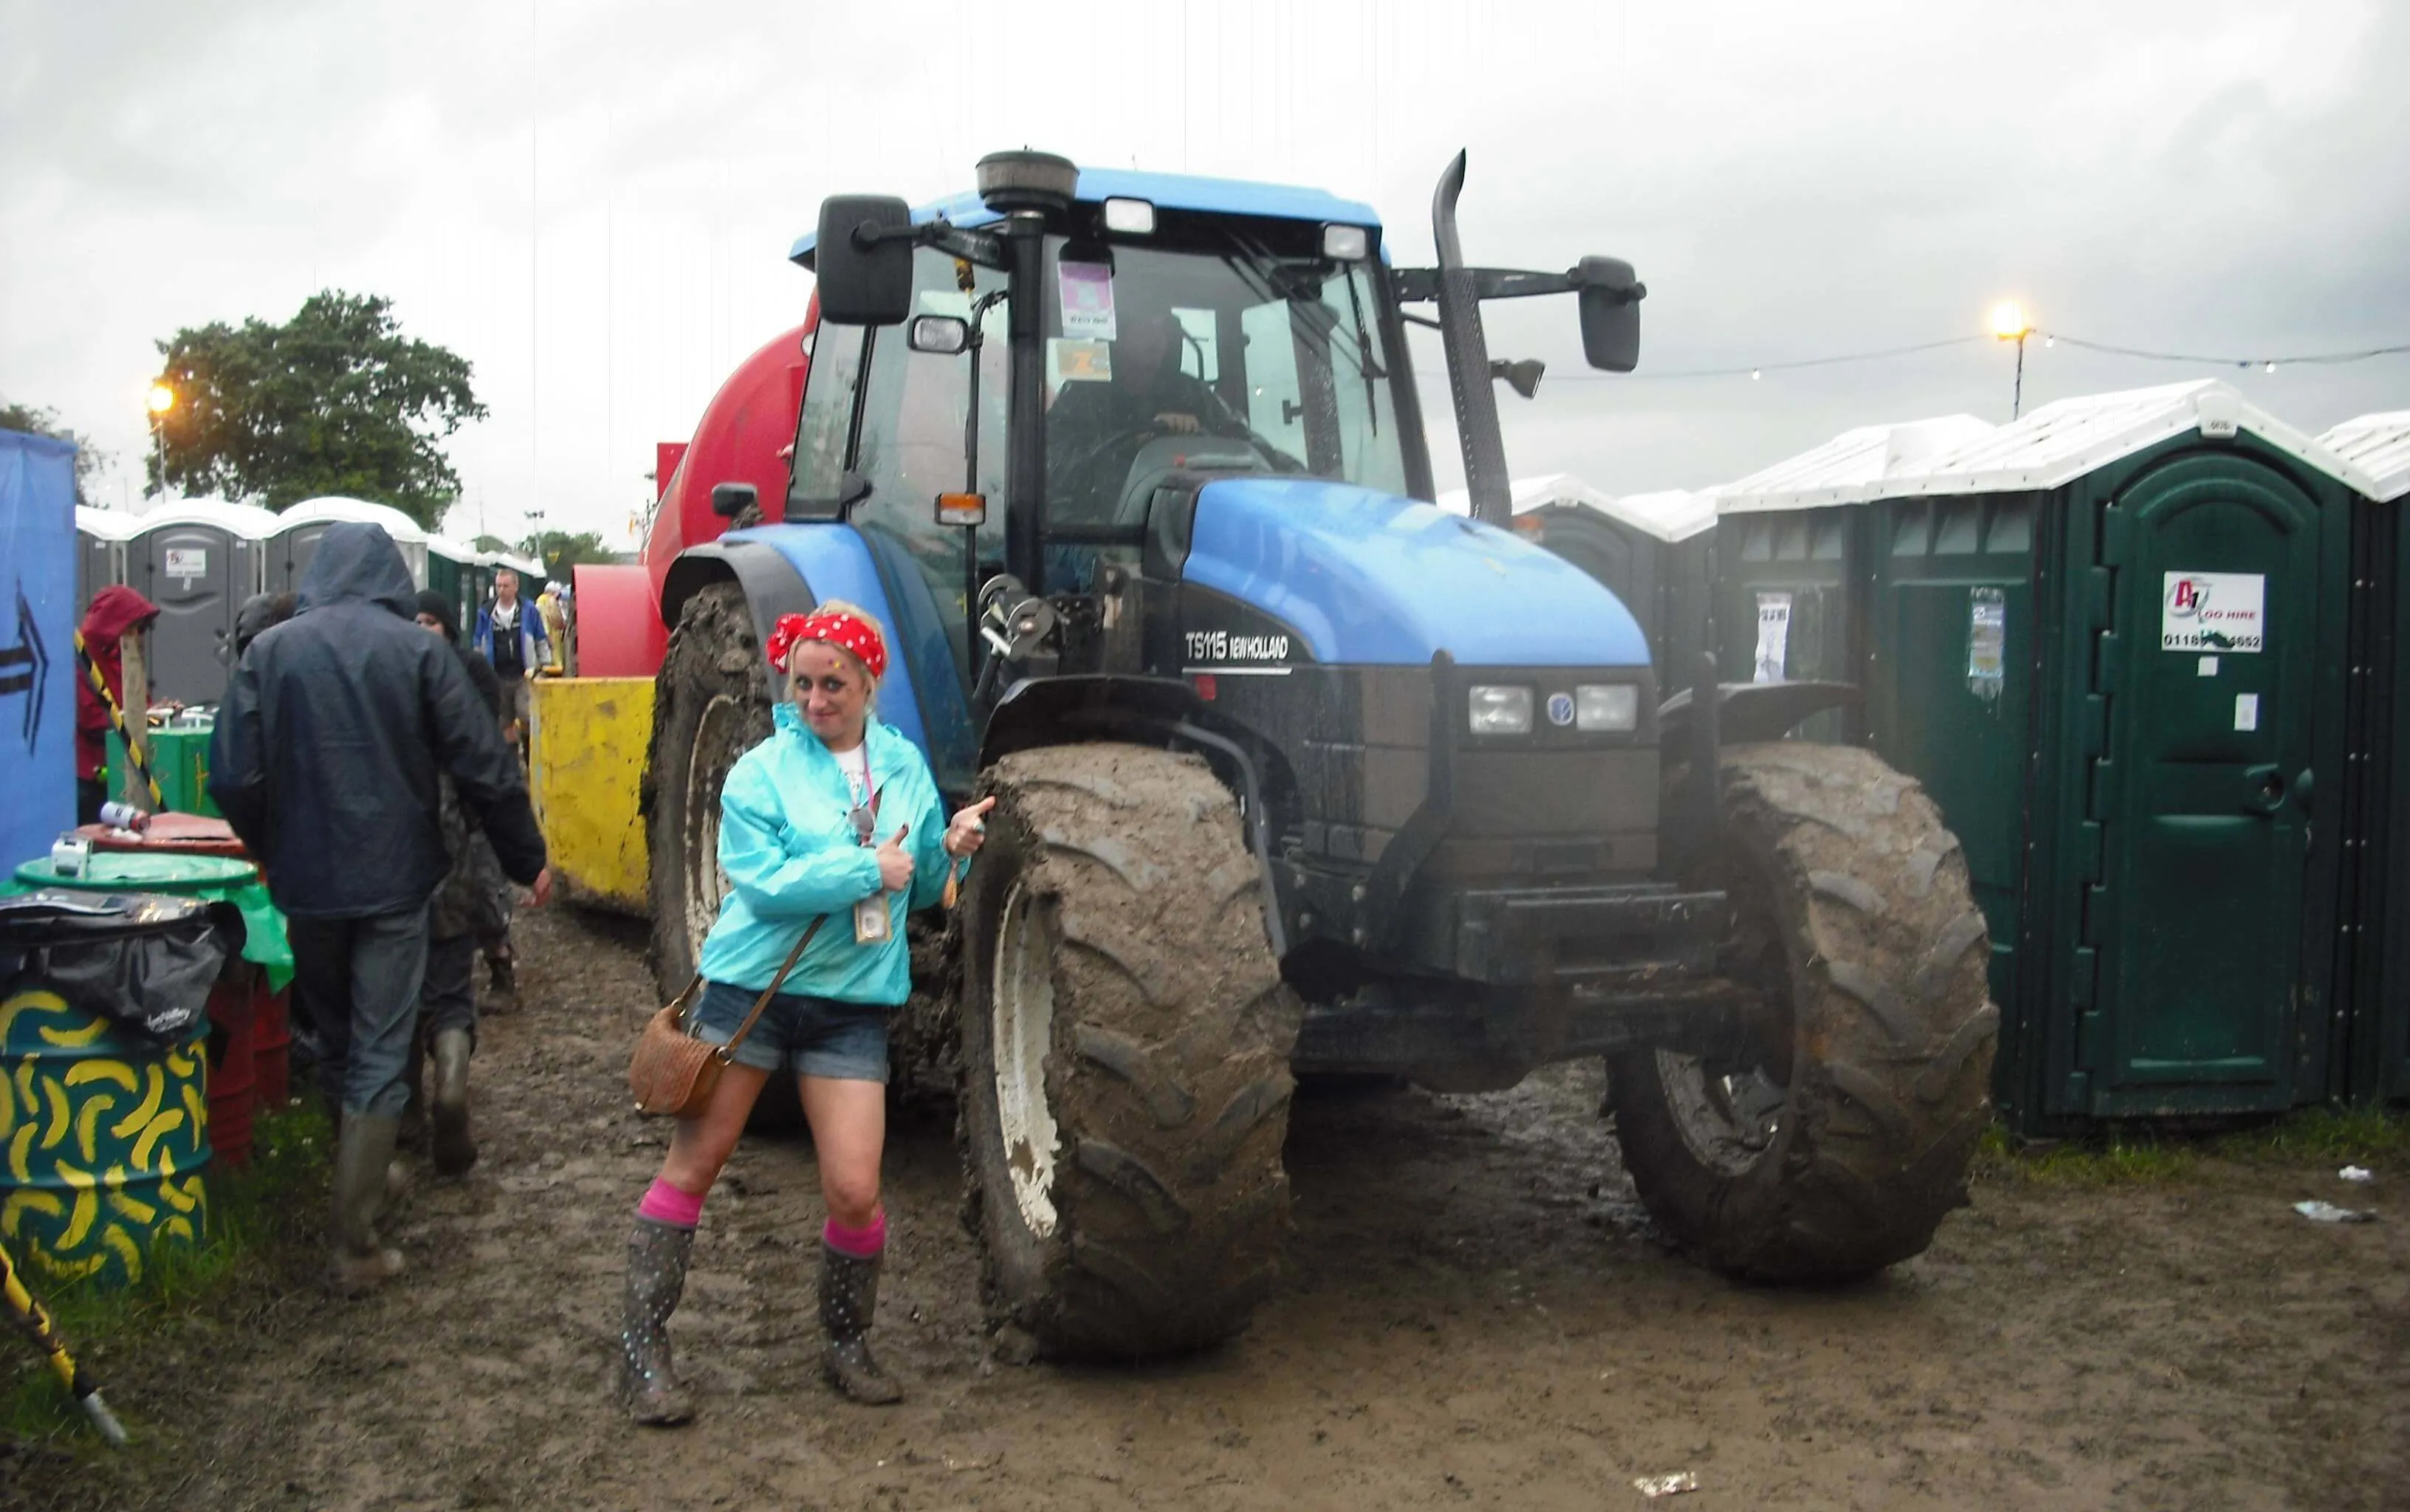 Top tips for toilets at Glastonbury Festival